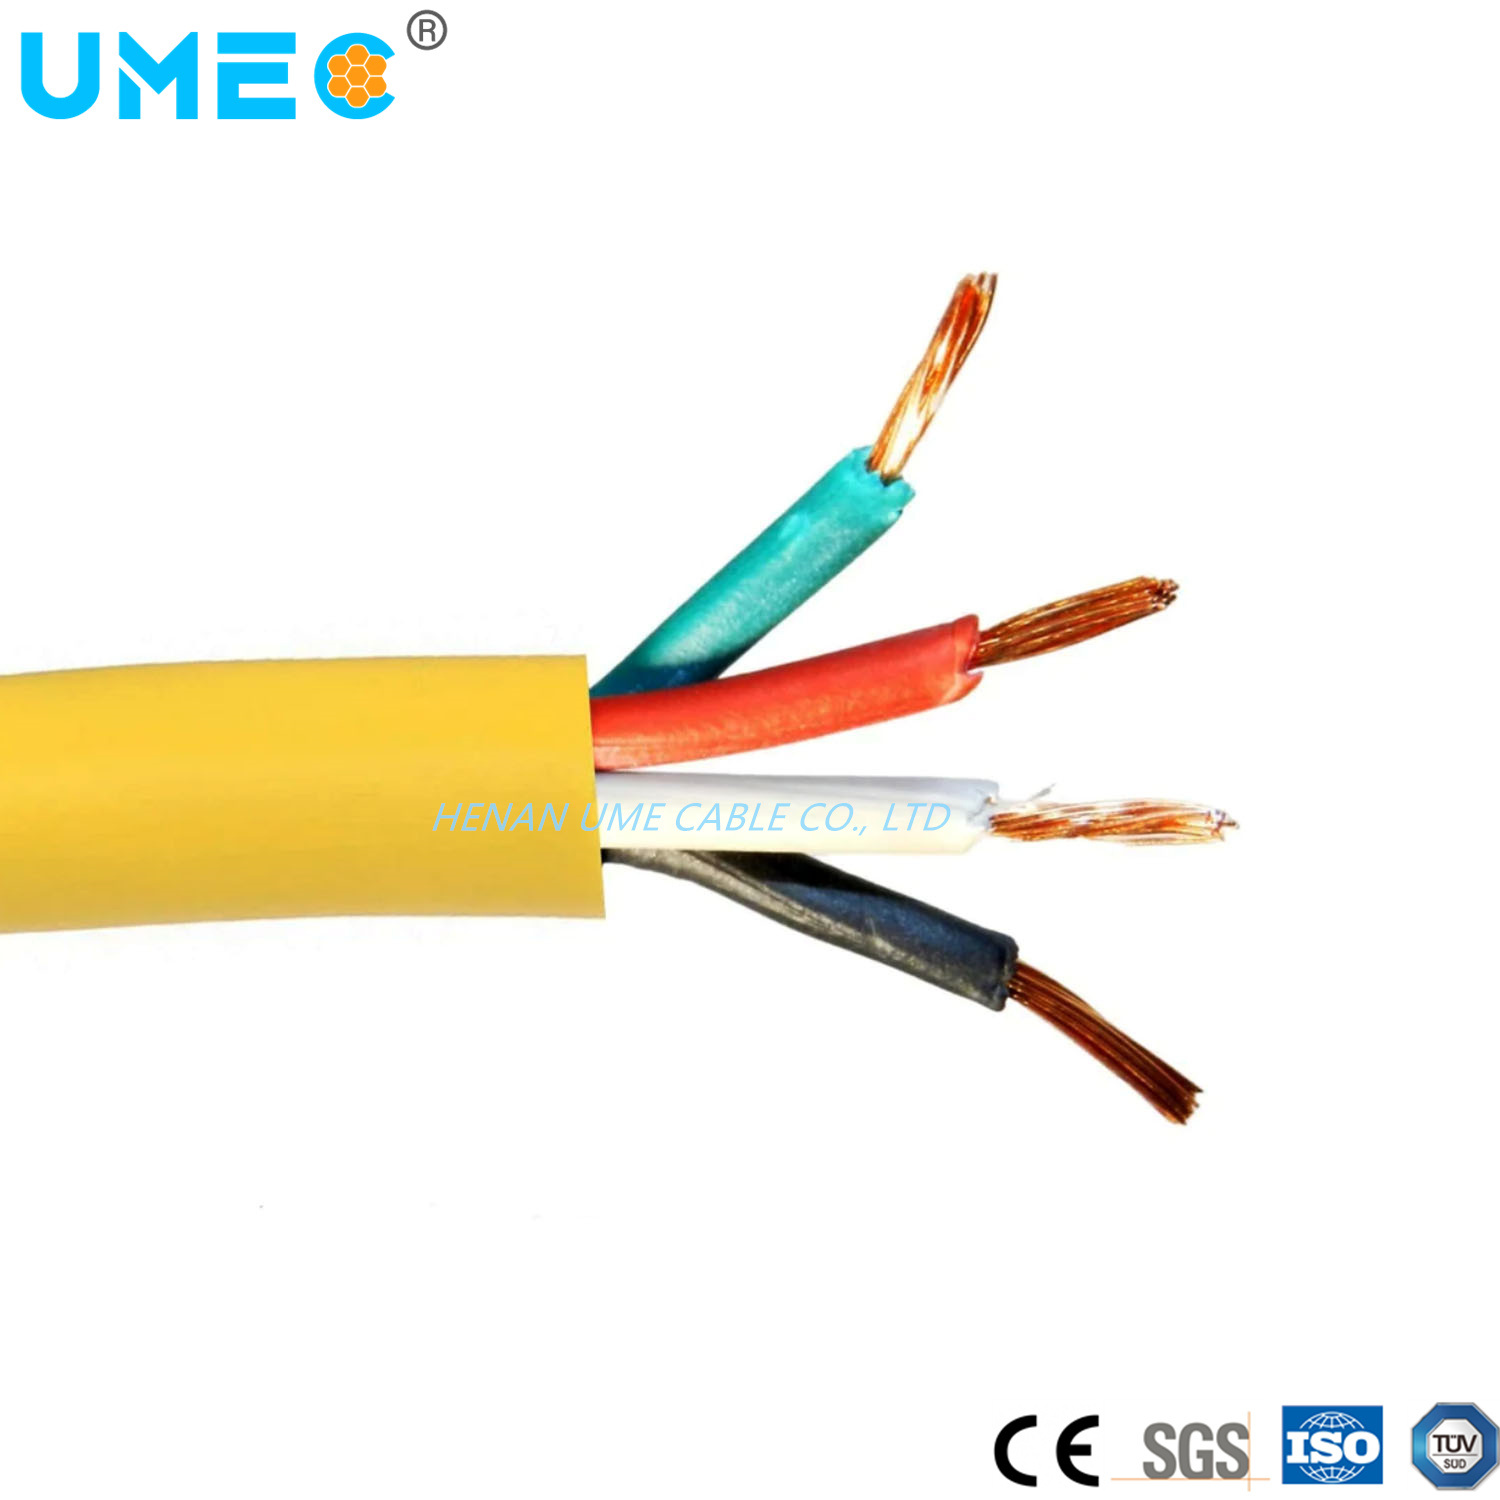 So Soow Sjoow Flexible Rubber Cable 300V 600V Us Best Selling 3X16AWG 3X14AWG 3X12AWG 3X10AWG Factory Prices